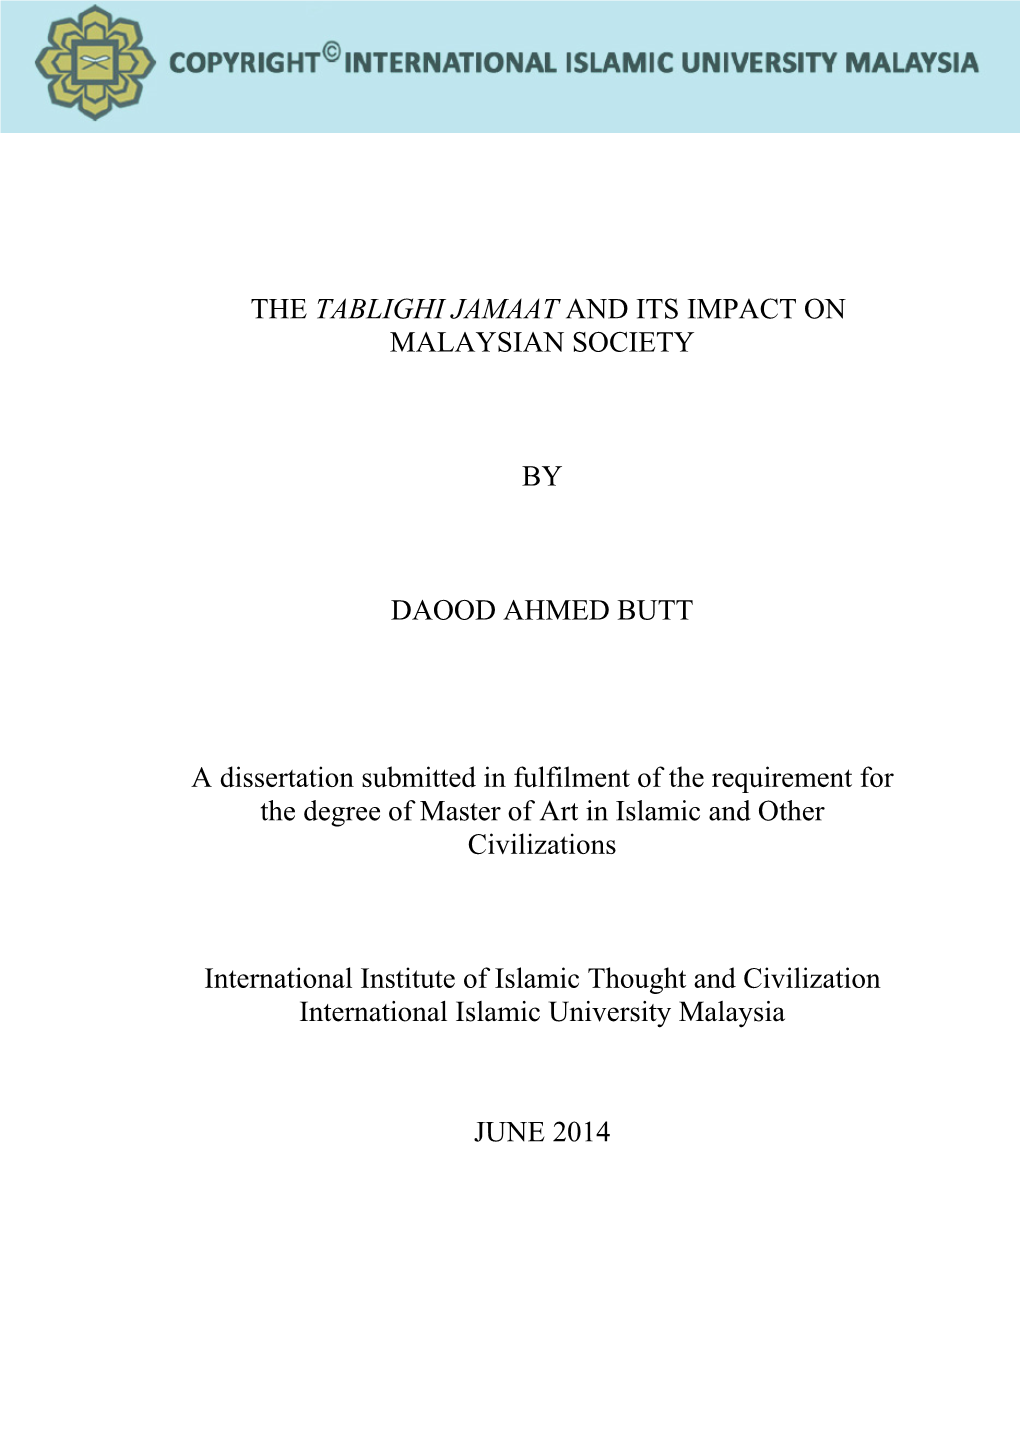 The Tablighi Jamaat and Its Impact on Malaysian Society